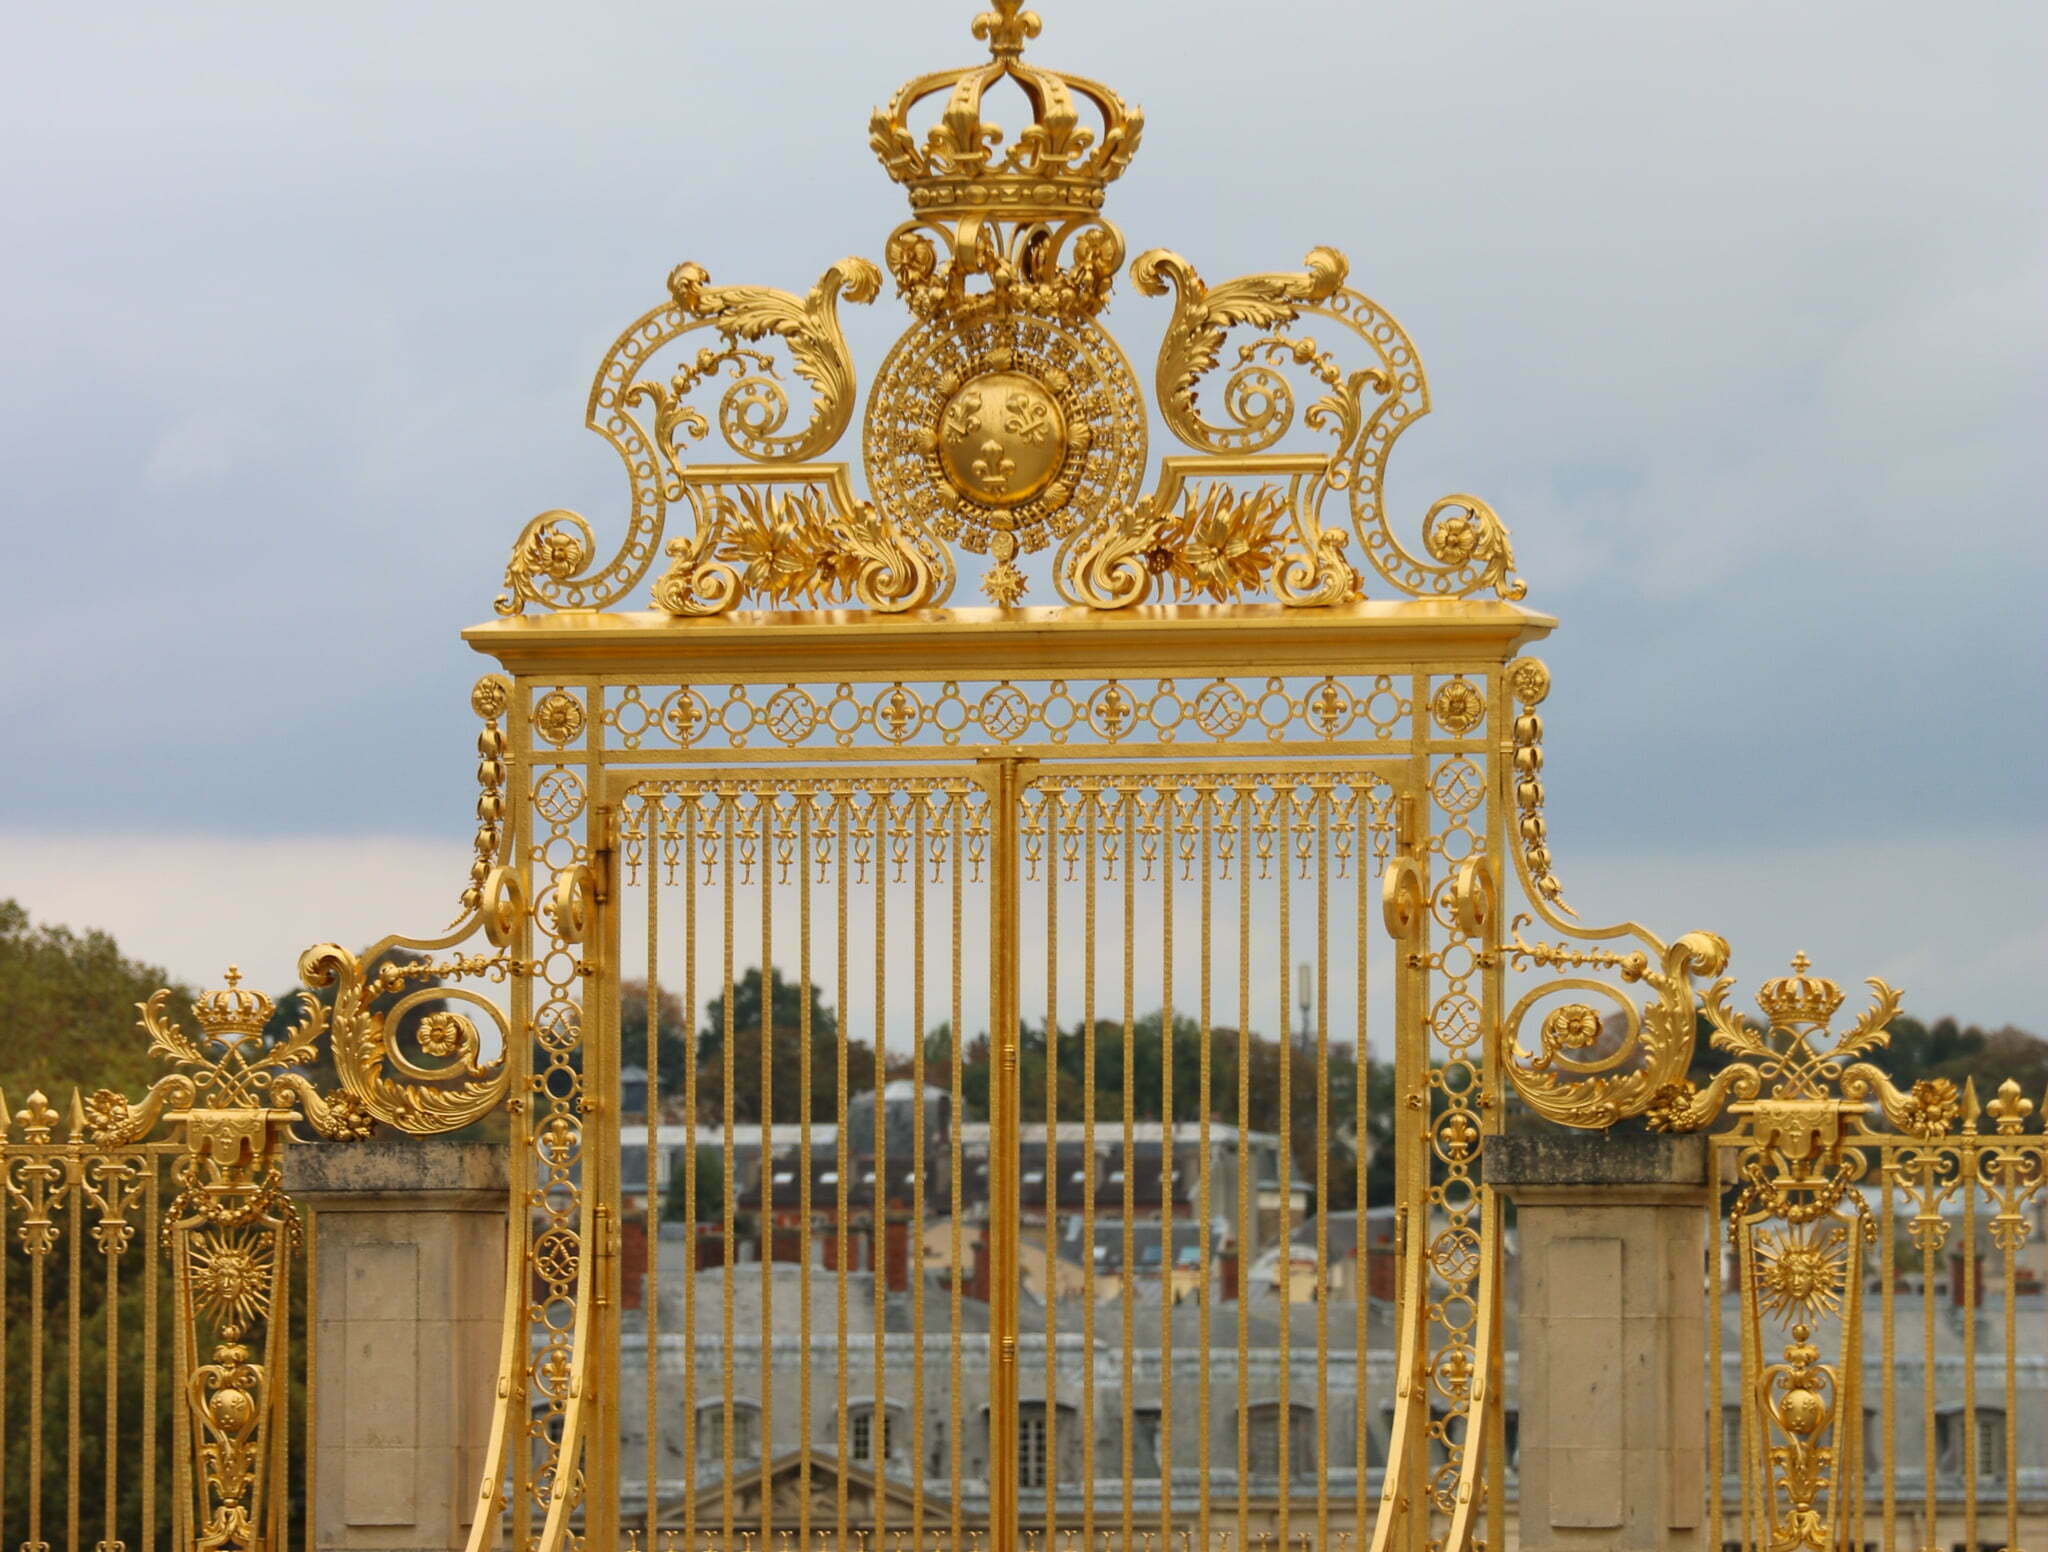 A gilded, golden gate with a crown and sun at the top of the gate